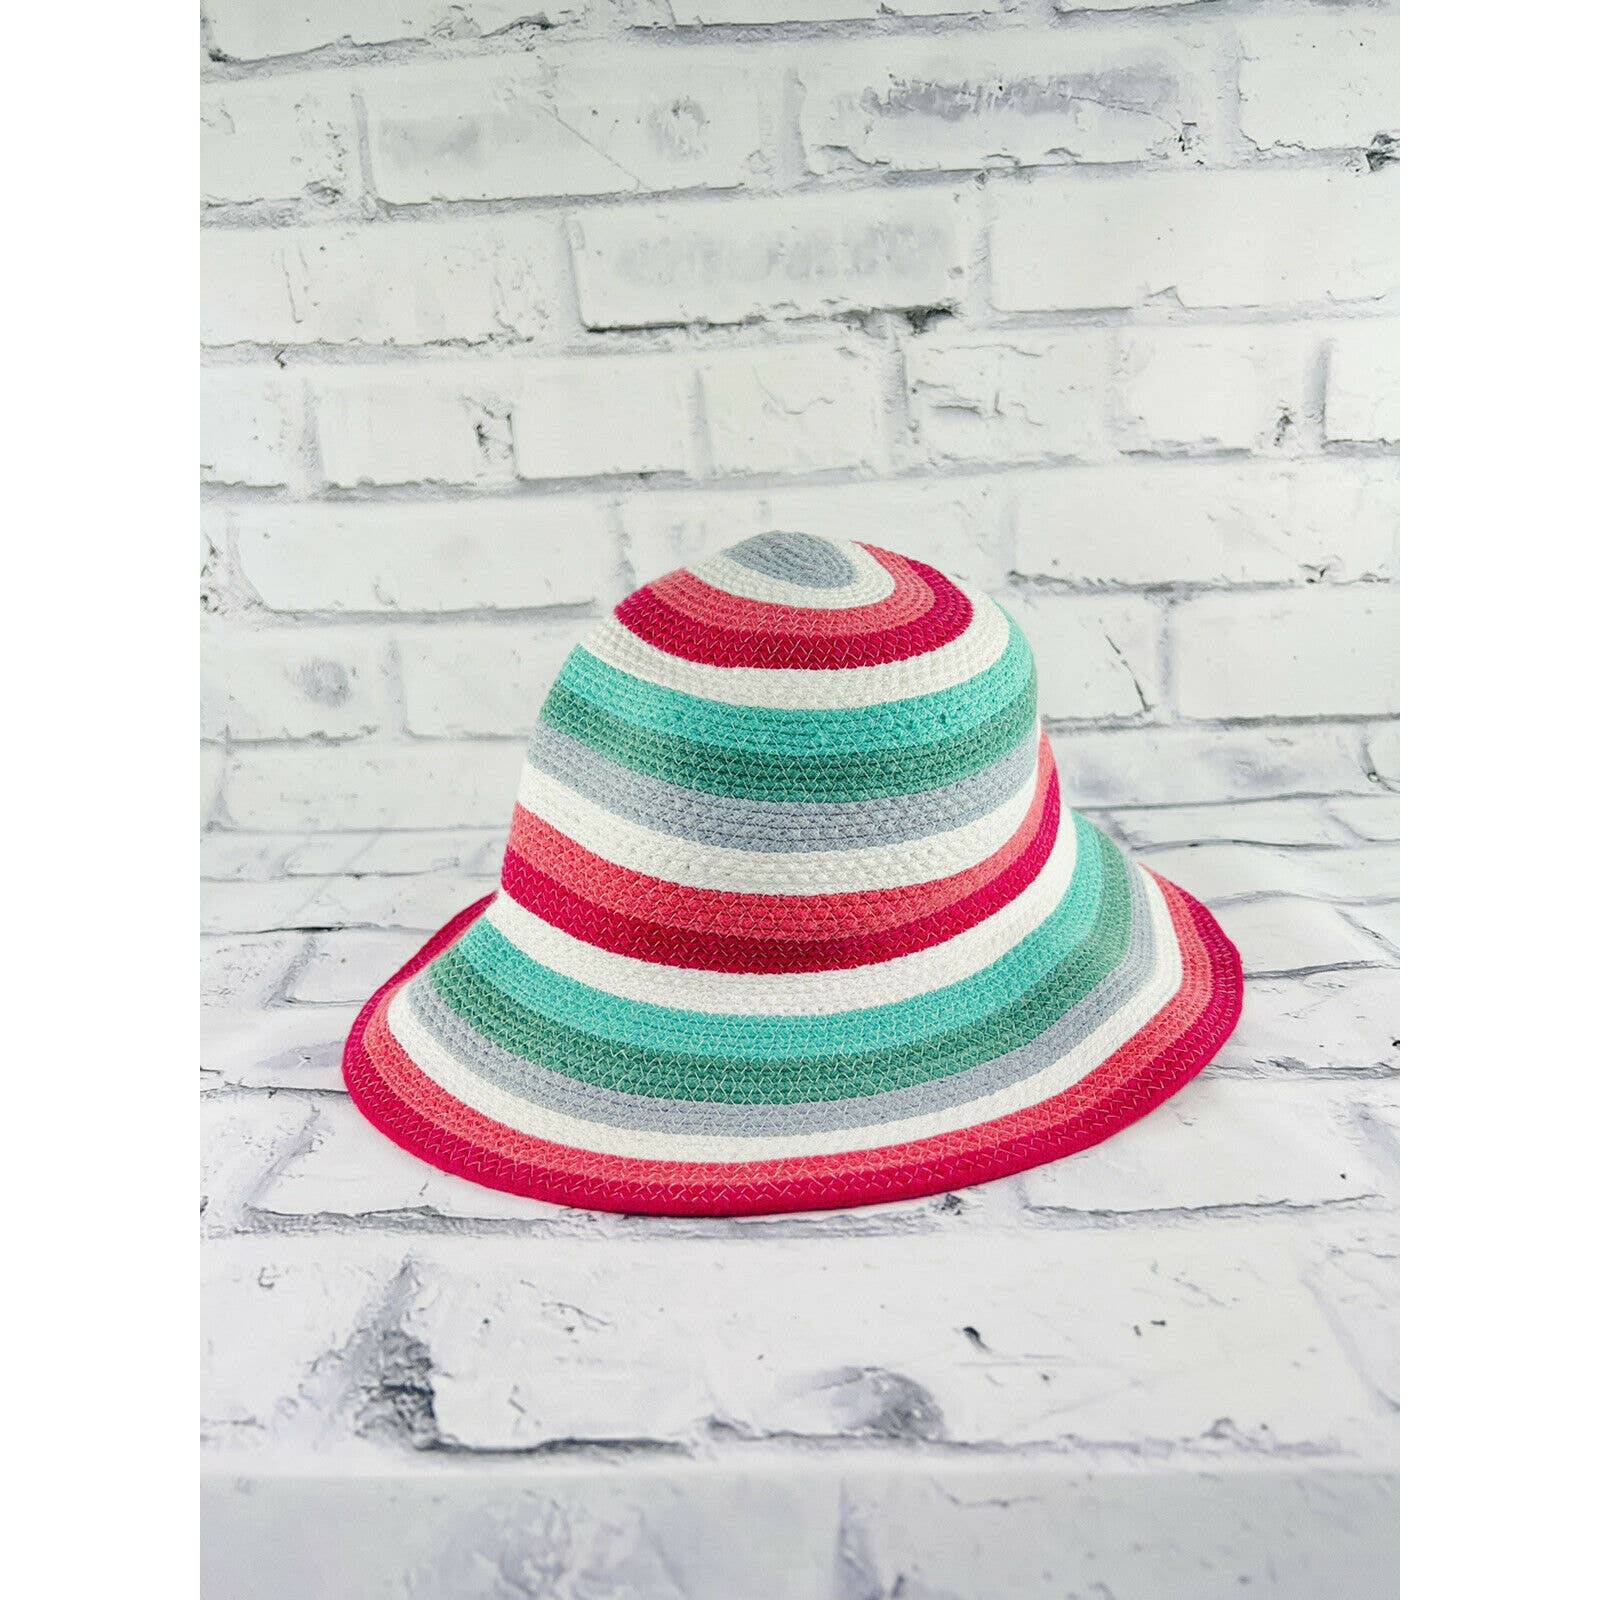 Jaclyn Smith Floppy Hat Women’s One Size Beach Summer Colorful Stripes Packable